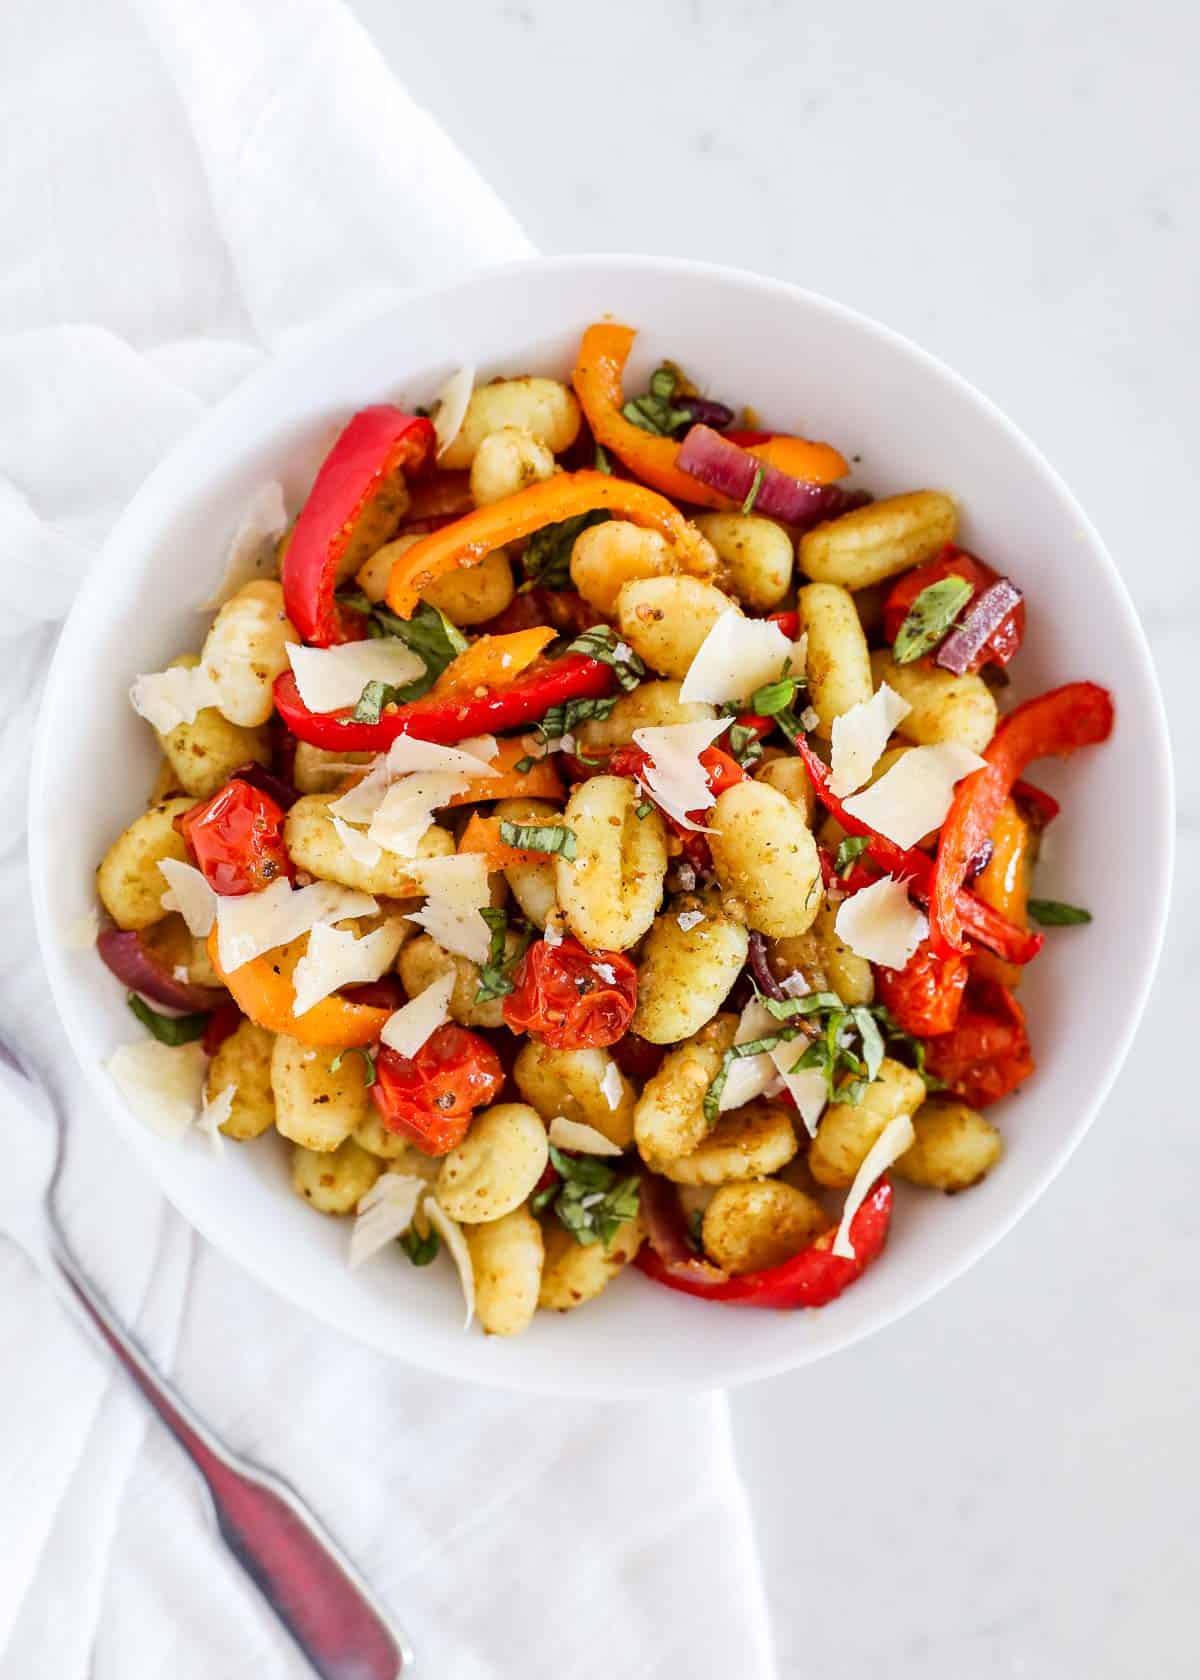 Gnocchi and vegetables in white bowl.